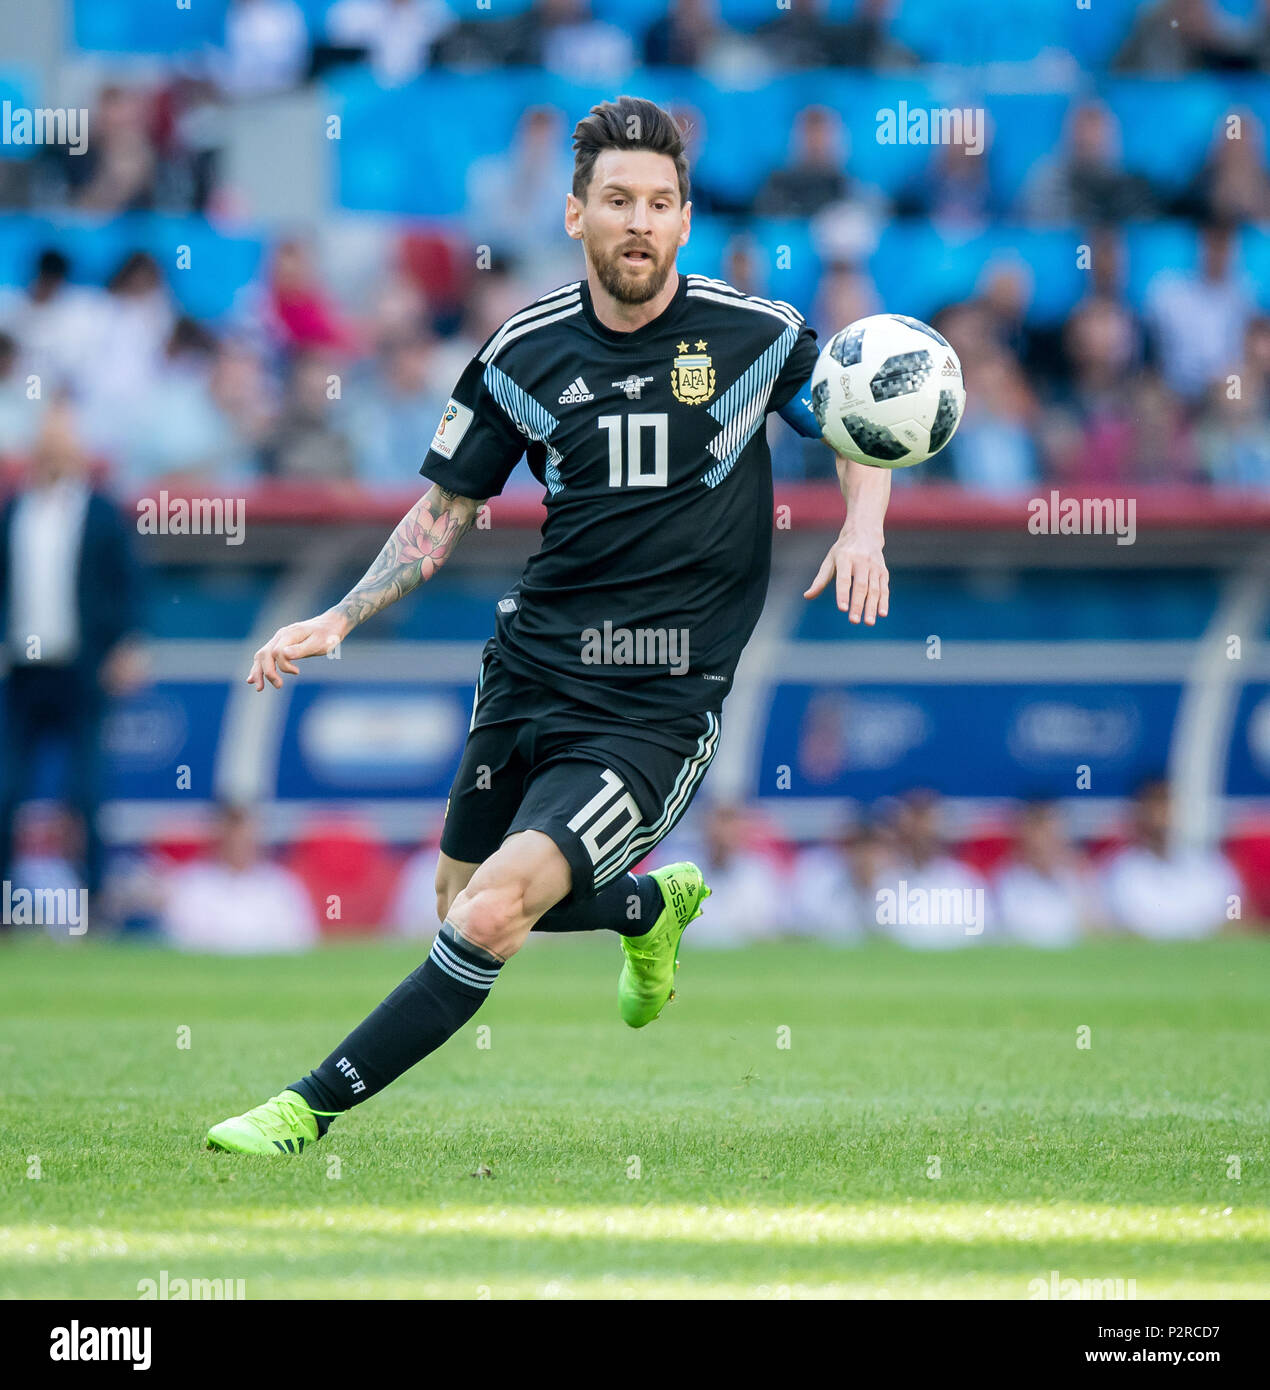 Moscow, Russland. 16th June, 2018. Lionel Messi (Argentina) on the ball GES/Football/World Cup 2018 Russia: Argentina - Iceland, 16.06.2018 GES/Soccer/Football/Worldcup 2018 Russia: Argentina vs Iceland, City, June 16, 2018 | usage worldwide Credit: dpa/Alamy Live News Stock Photo